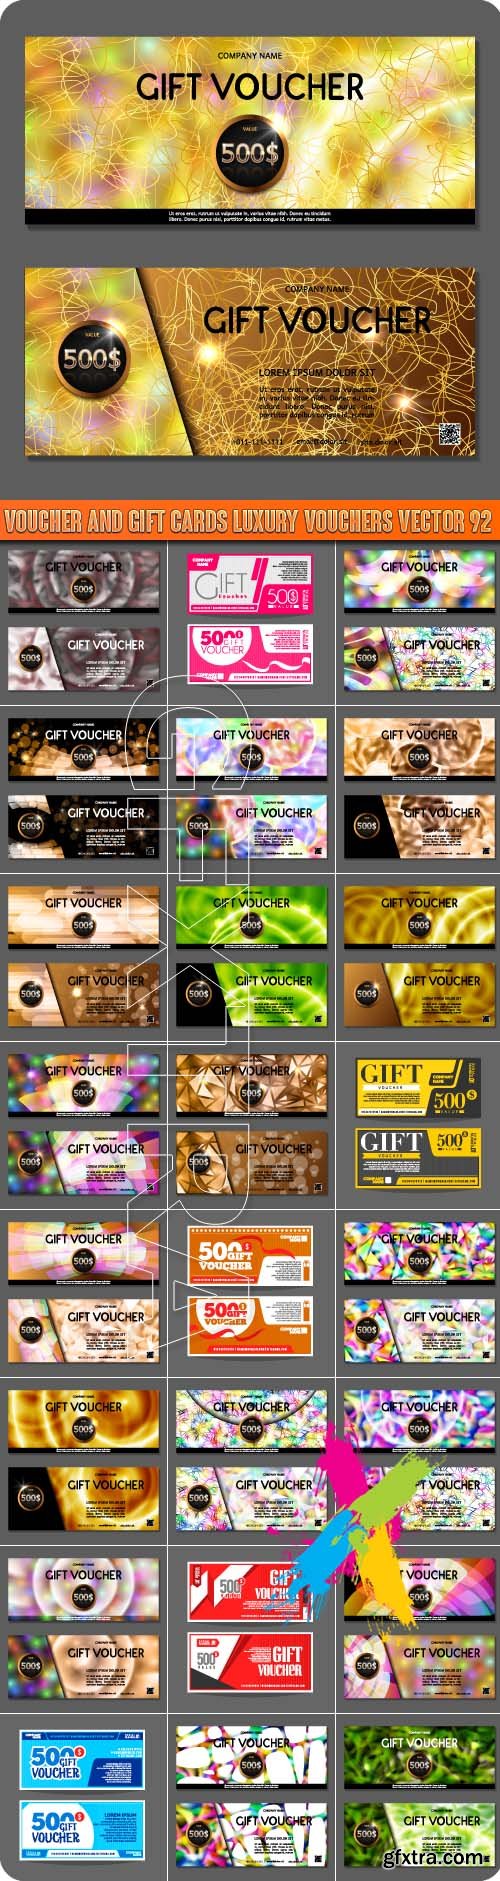 Voucher and gift cards luxury vouchers vector 92